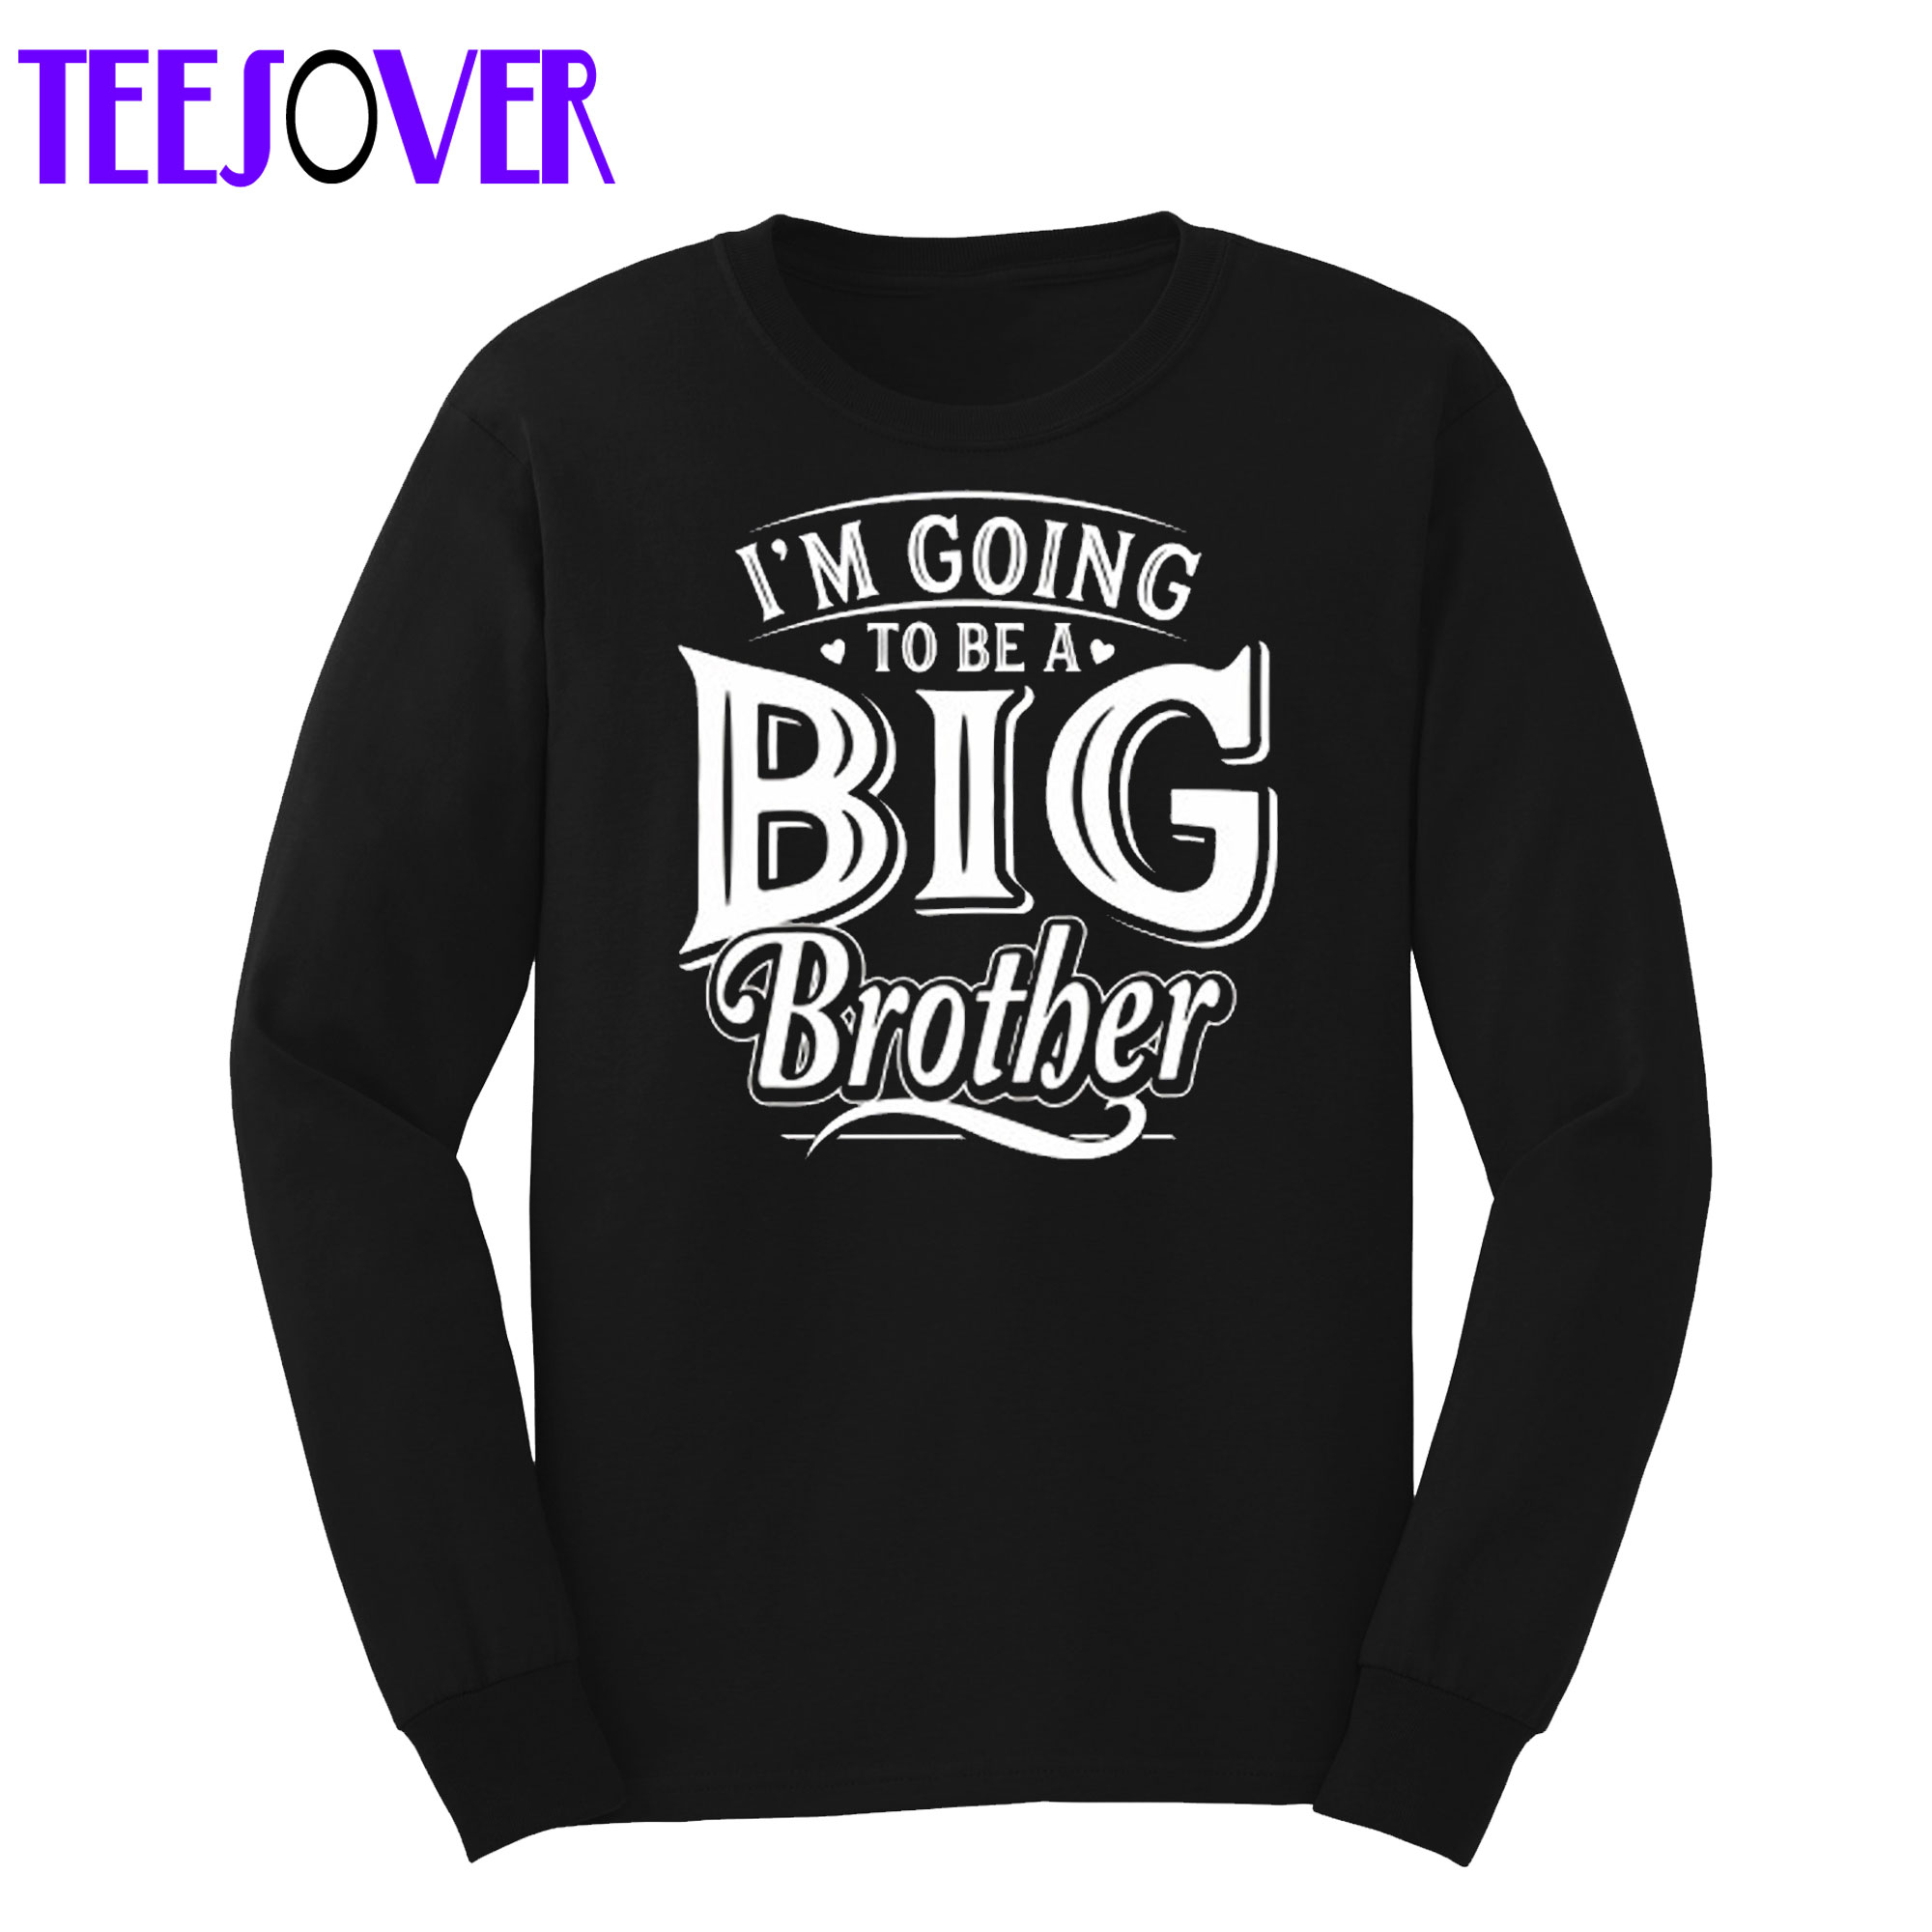 I’m Going To Be a Big Brother Sweatshirt